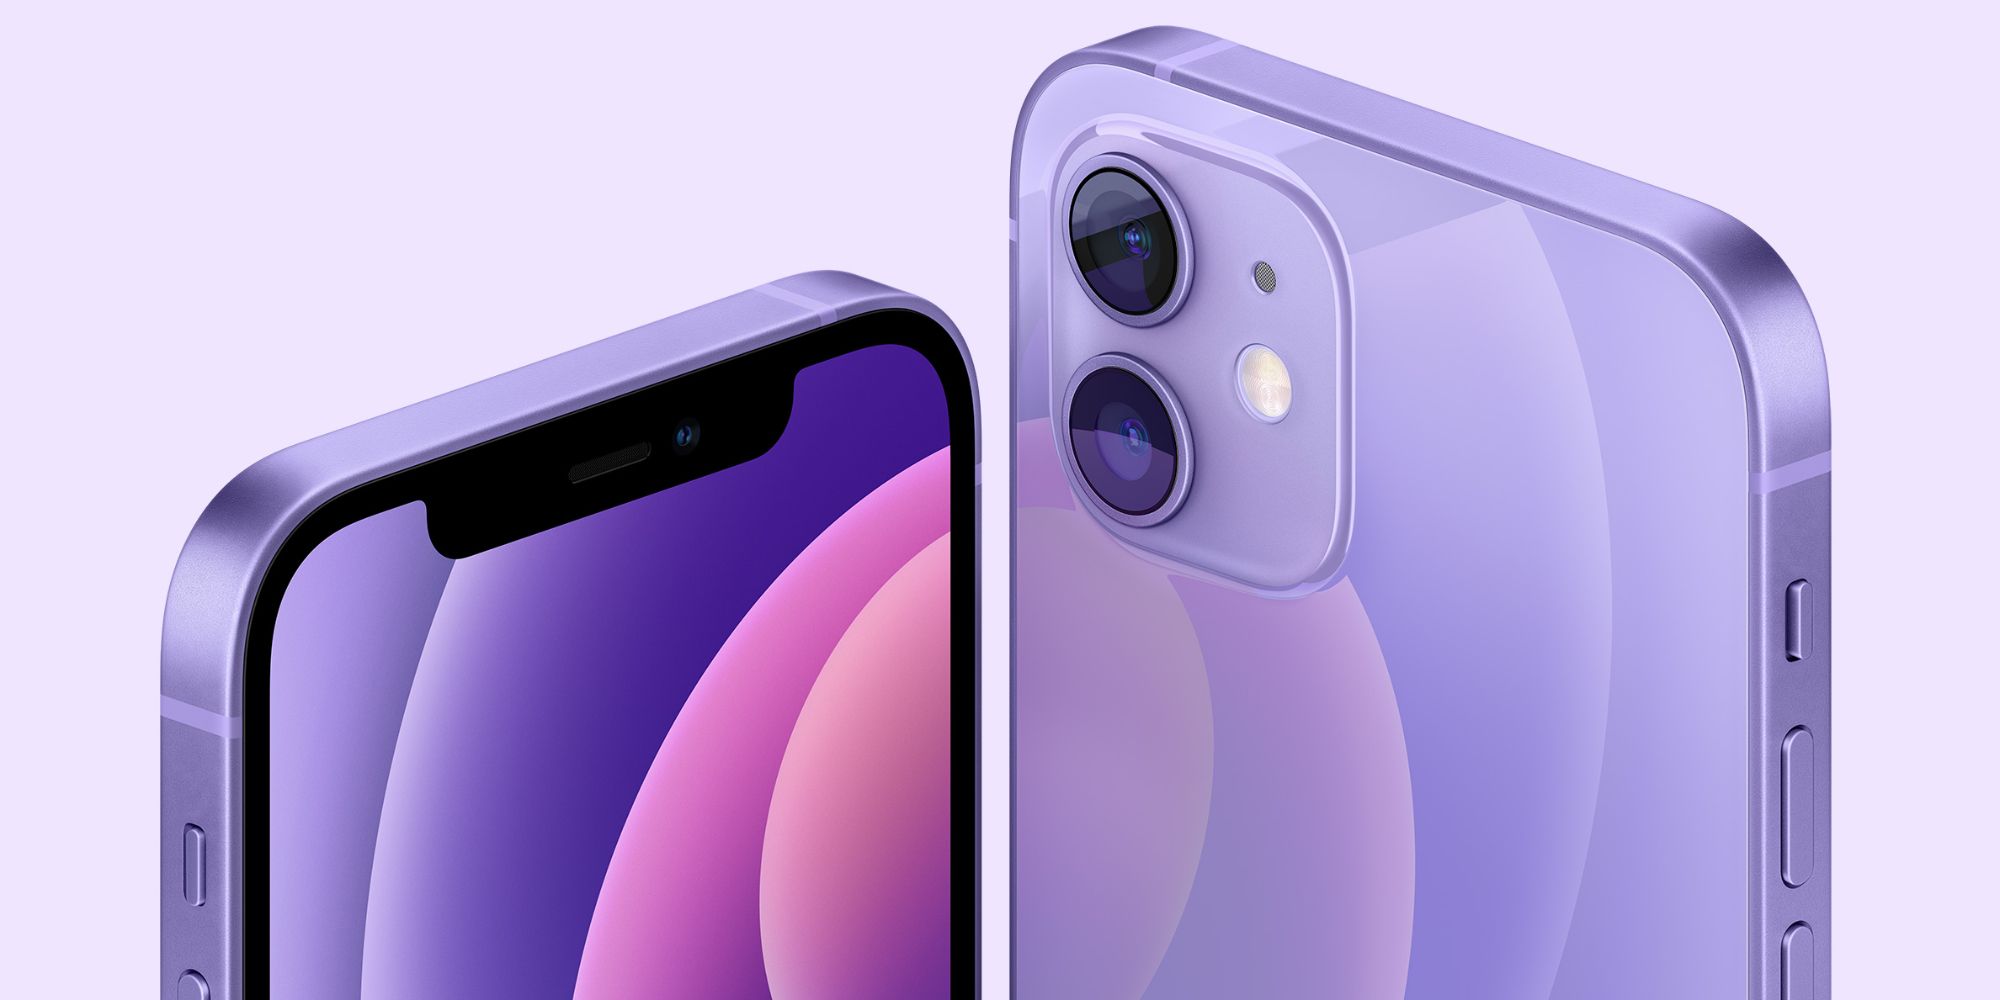 iPhone 12 and 12 mini in purple color